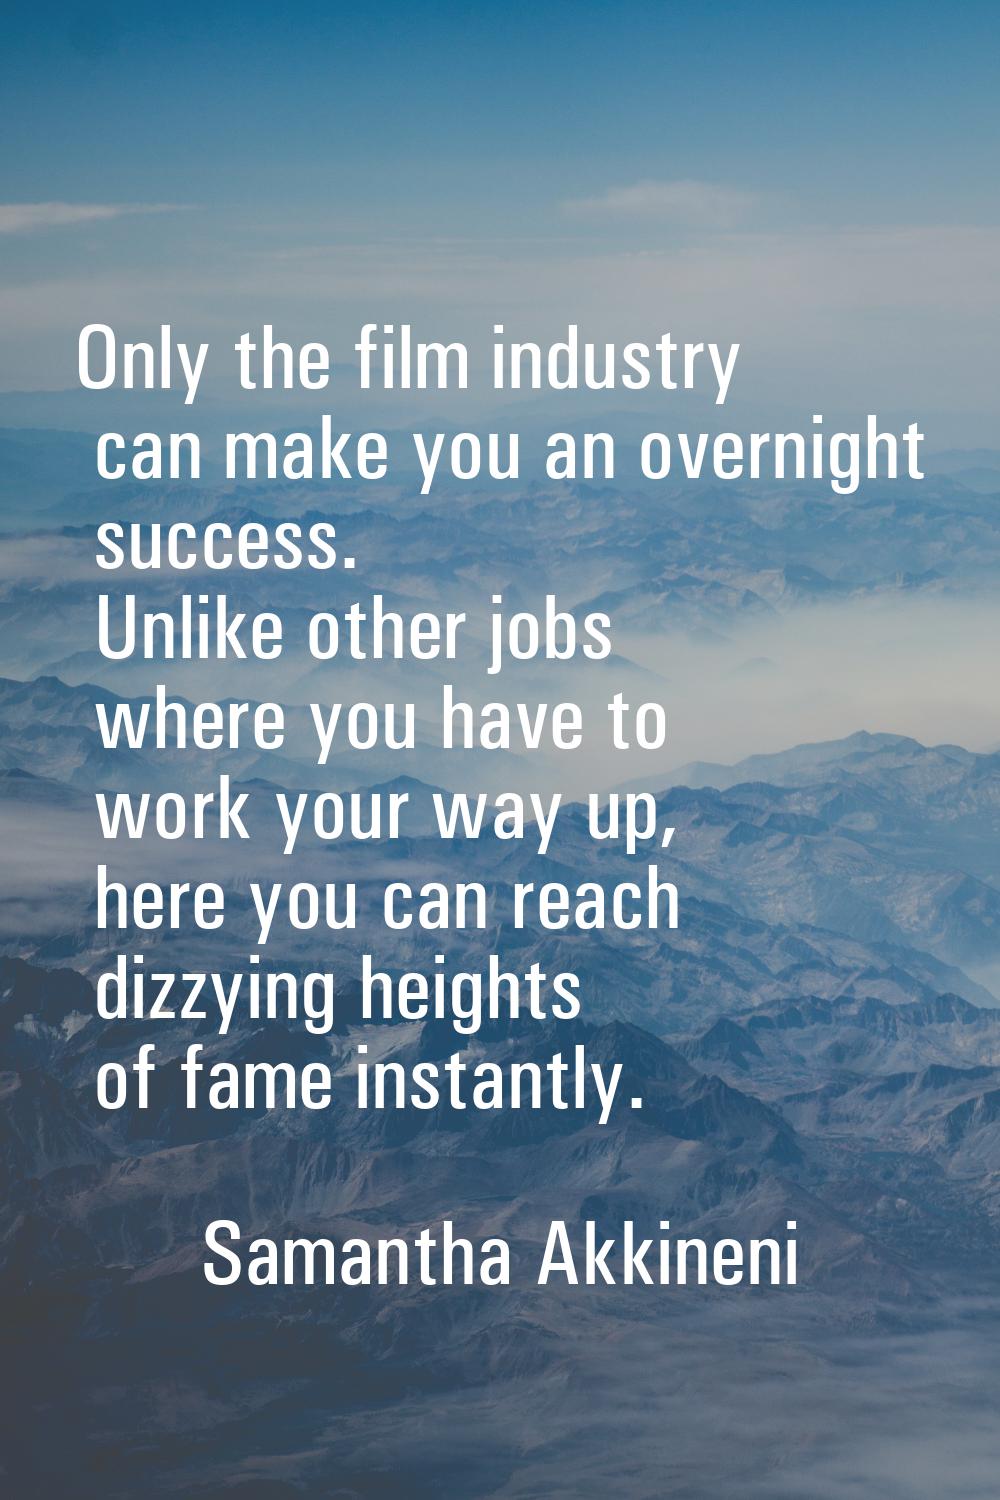 Only the film industry can make you an overnight success. Unlike other jobs where you have to work 